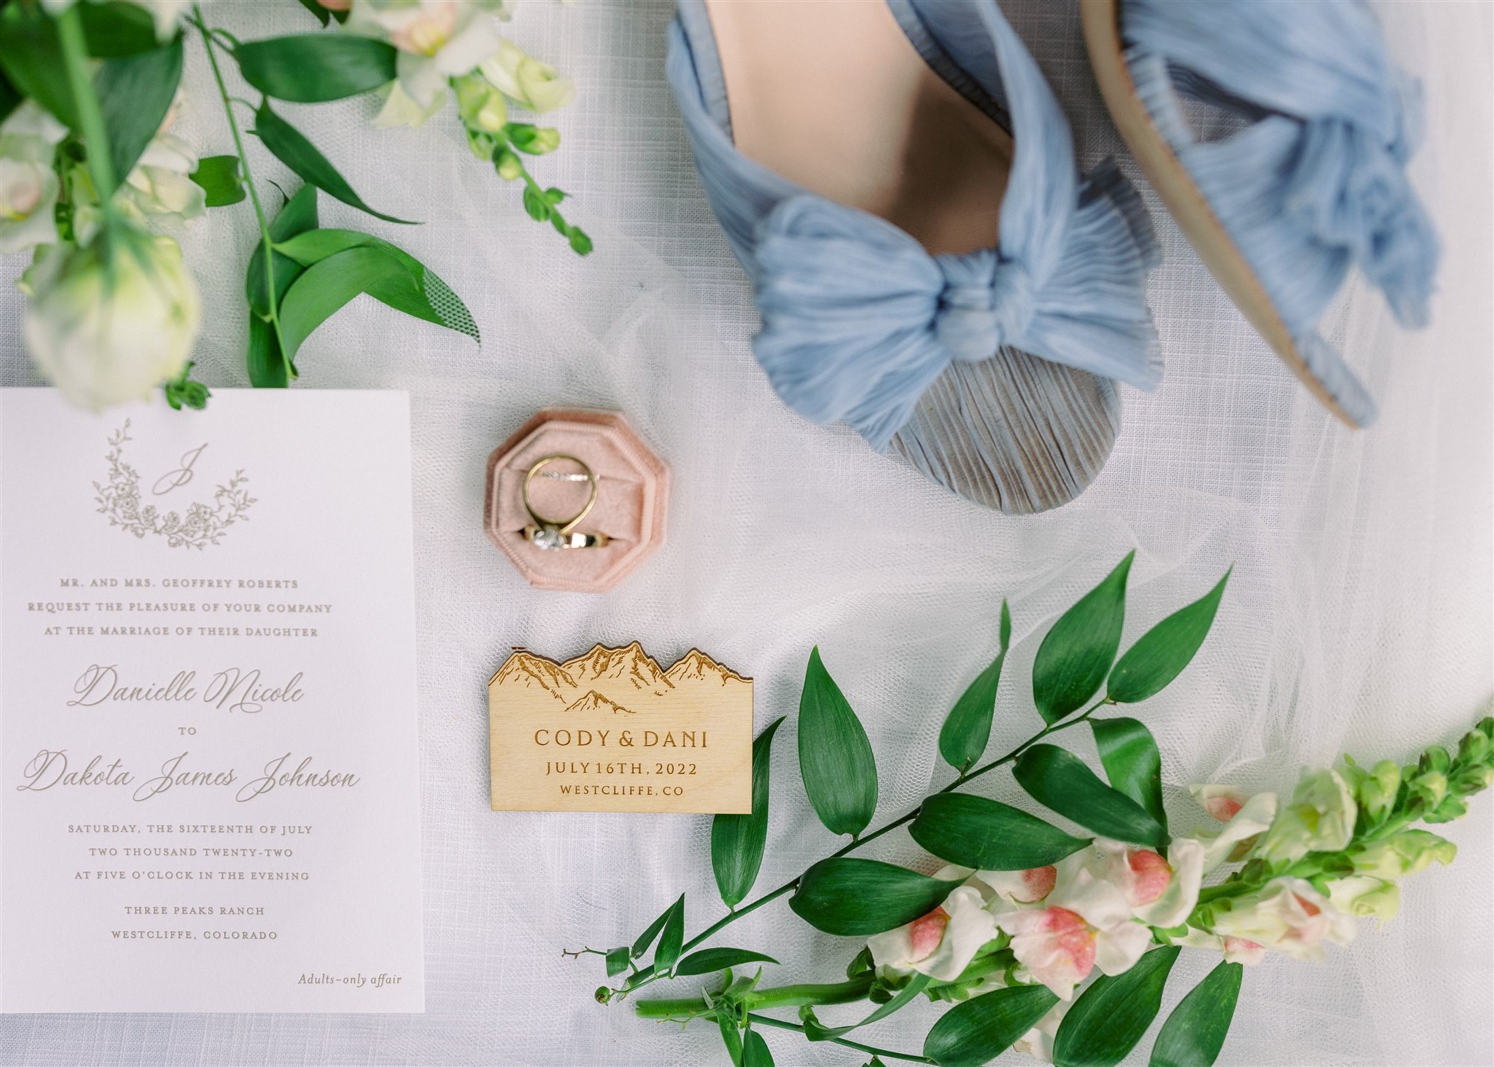 Wedding details photo with rings in pink box, light blue shoes, and wedding invitation | McArthur Weddings and Events